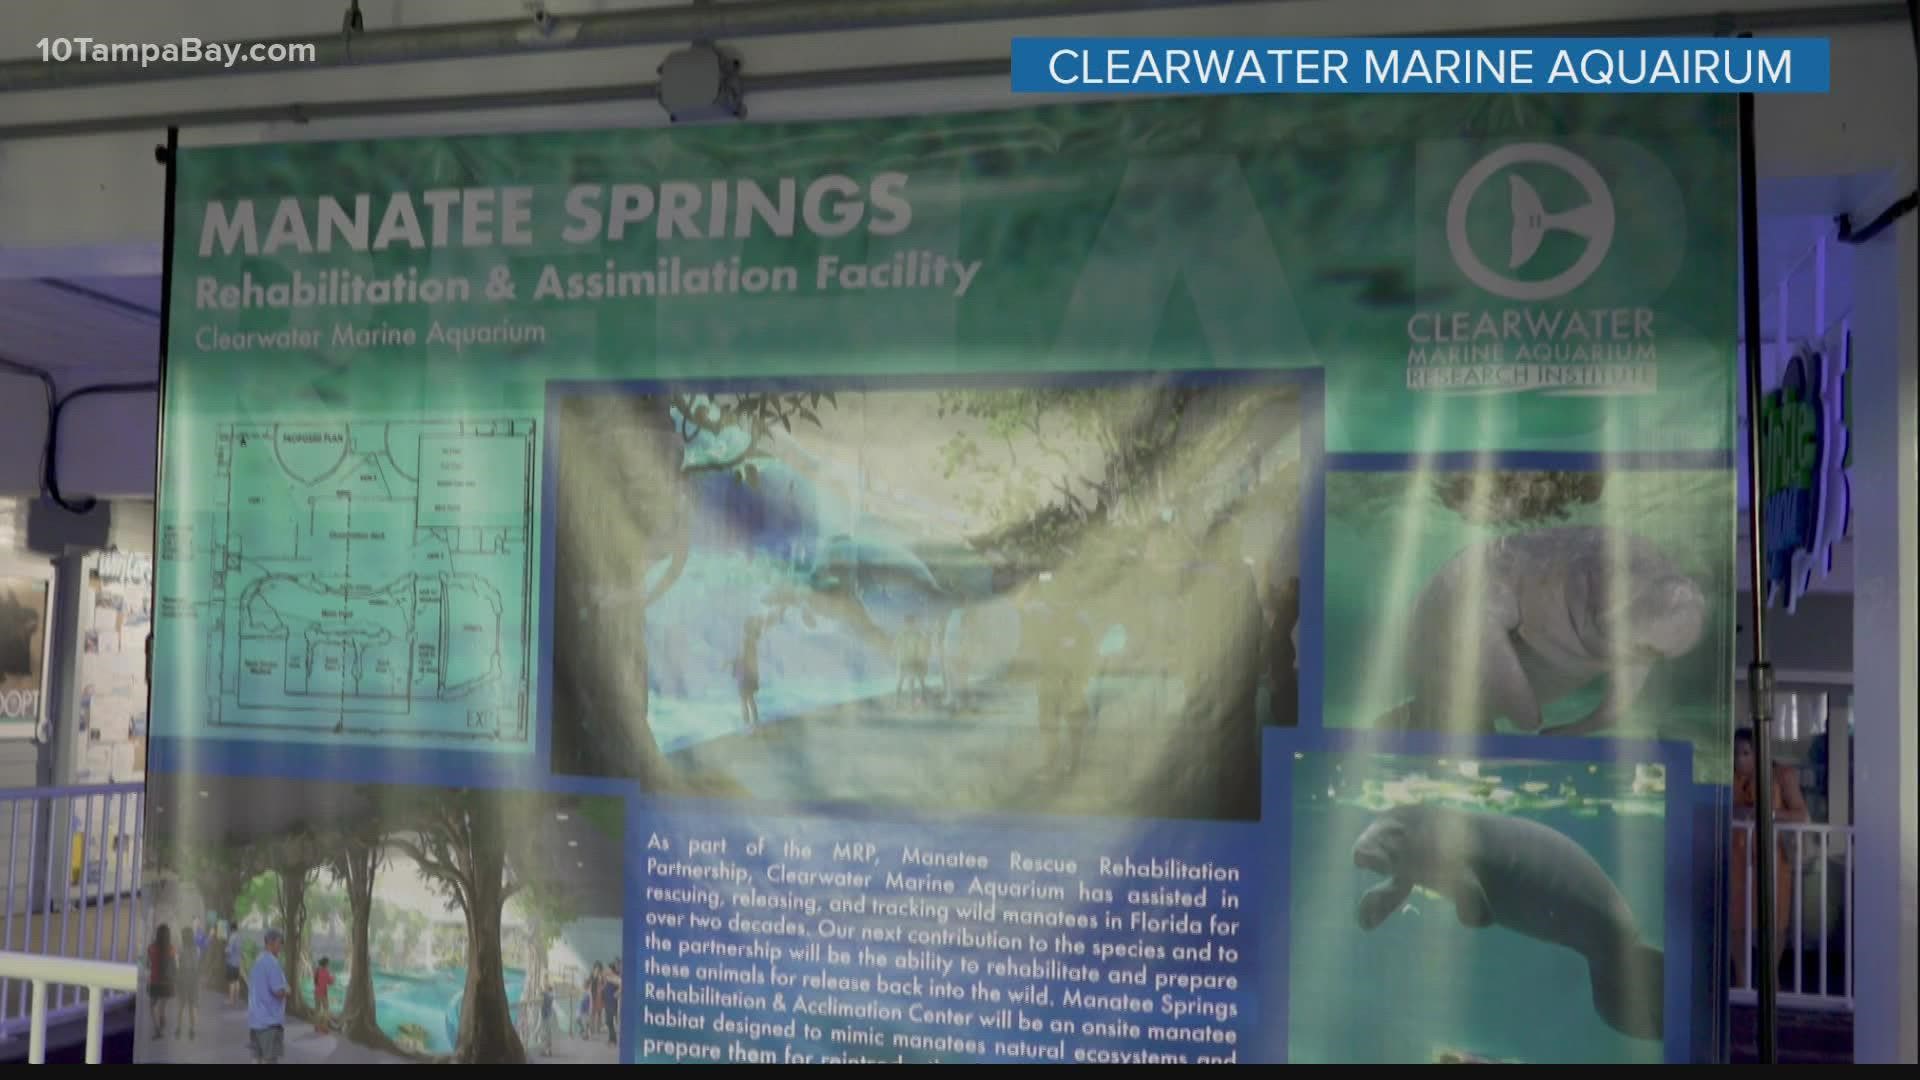 The aquarium says it will renovate the "Winter Zone" to make way for further care of manatees.